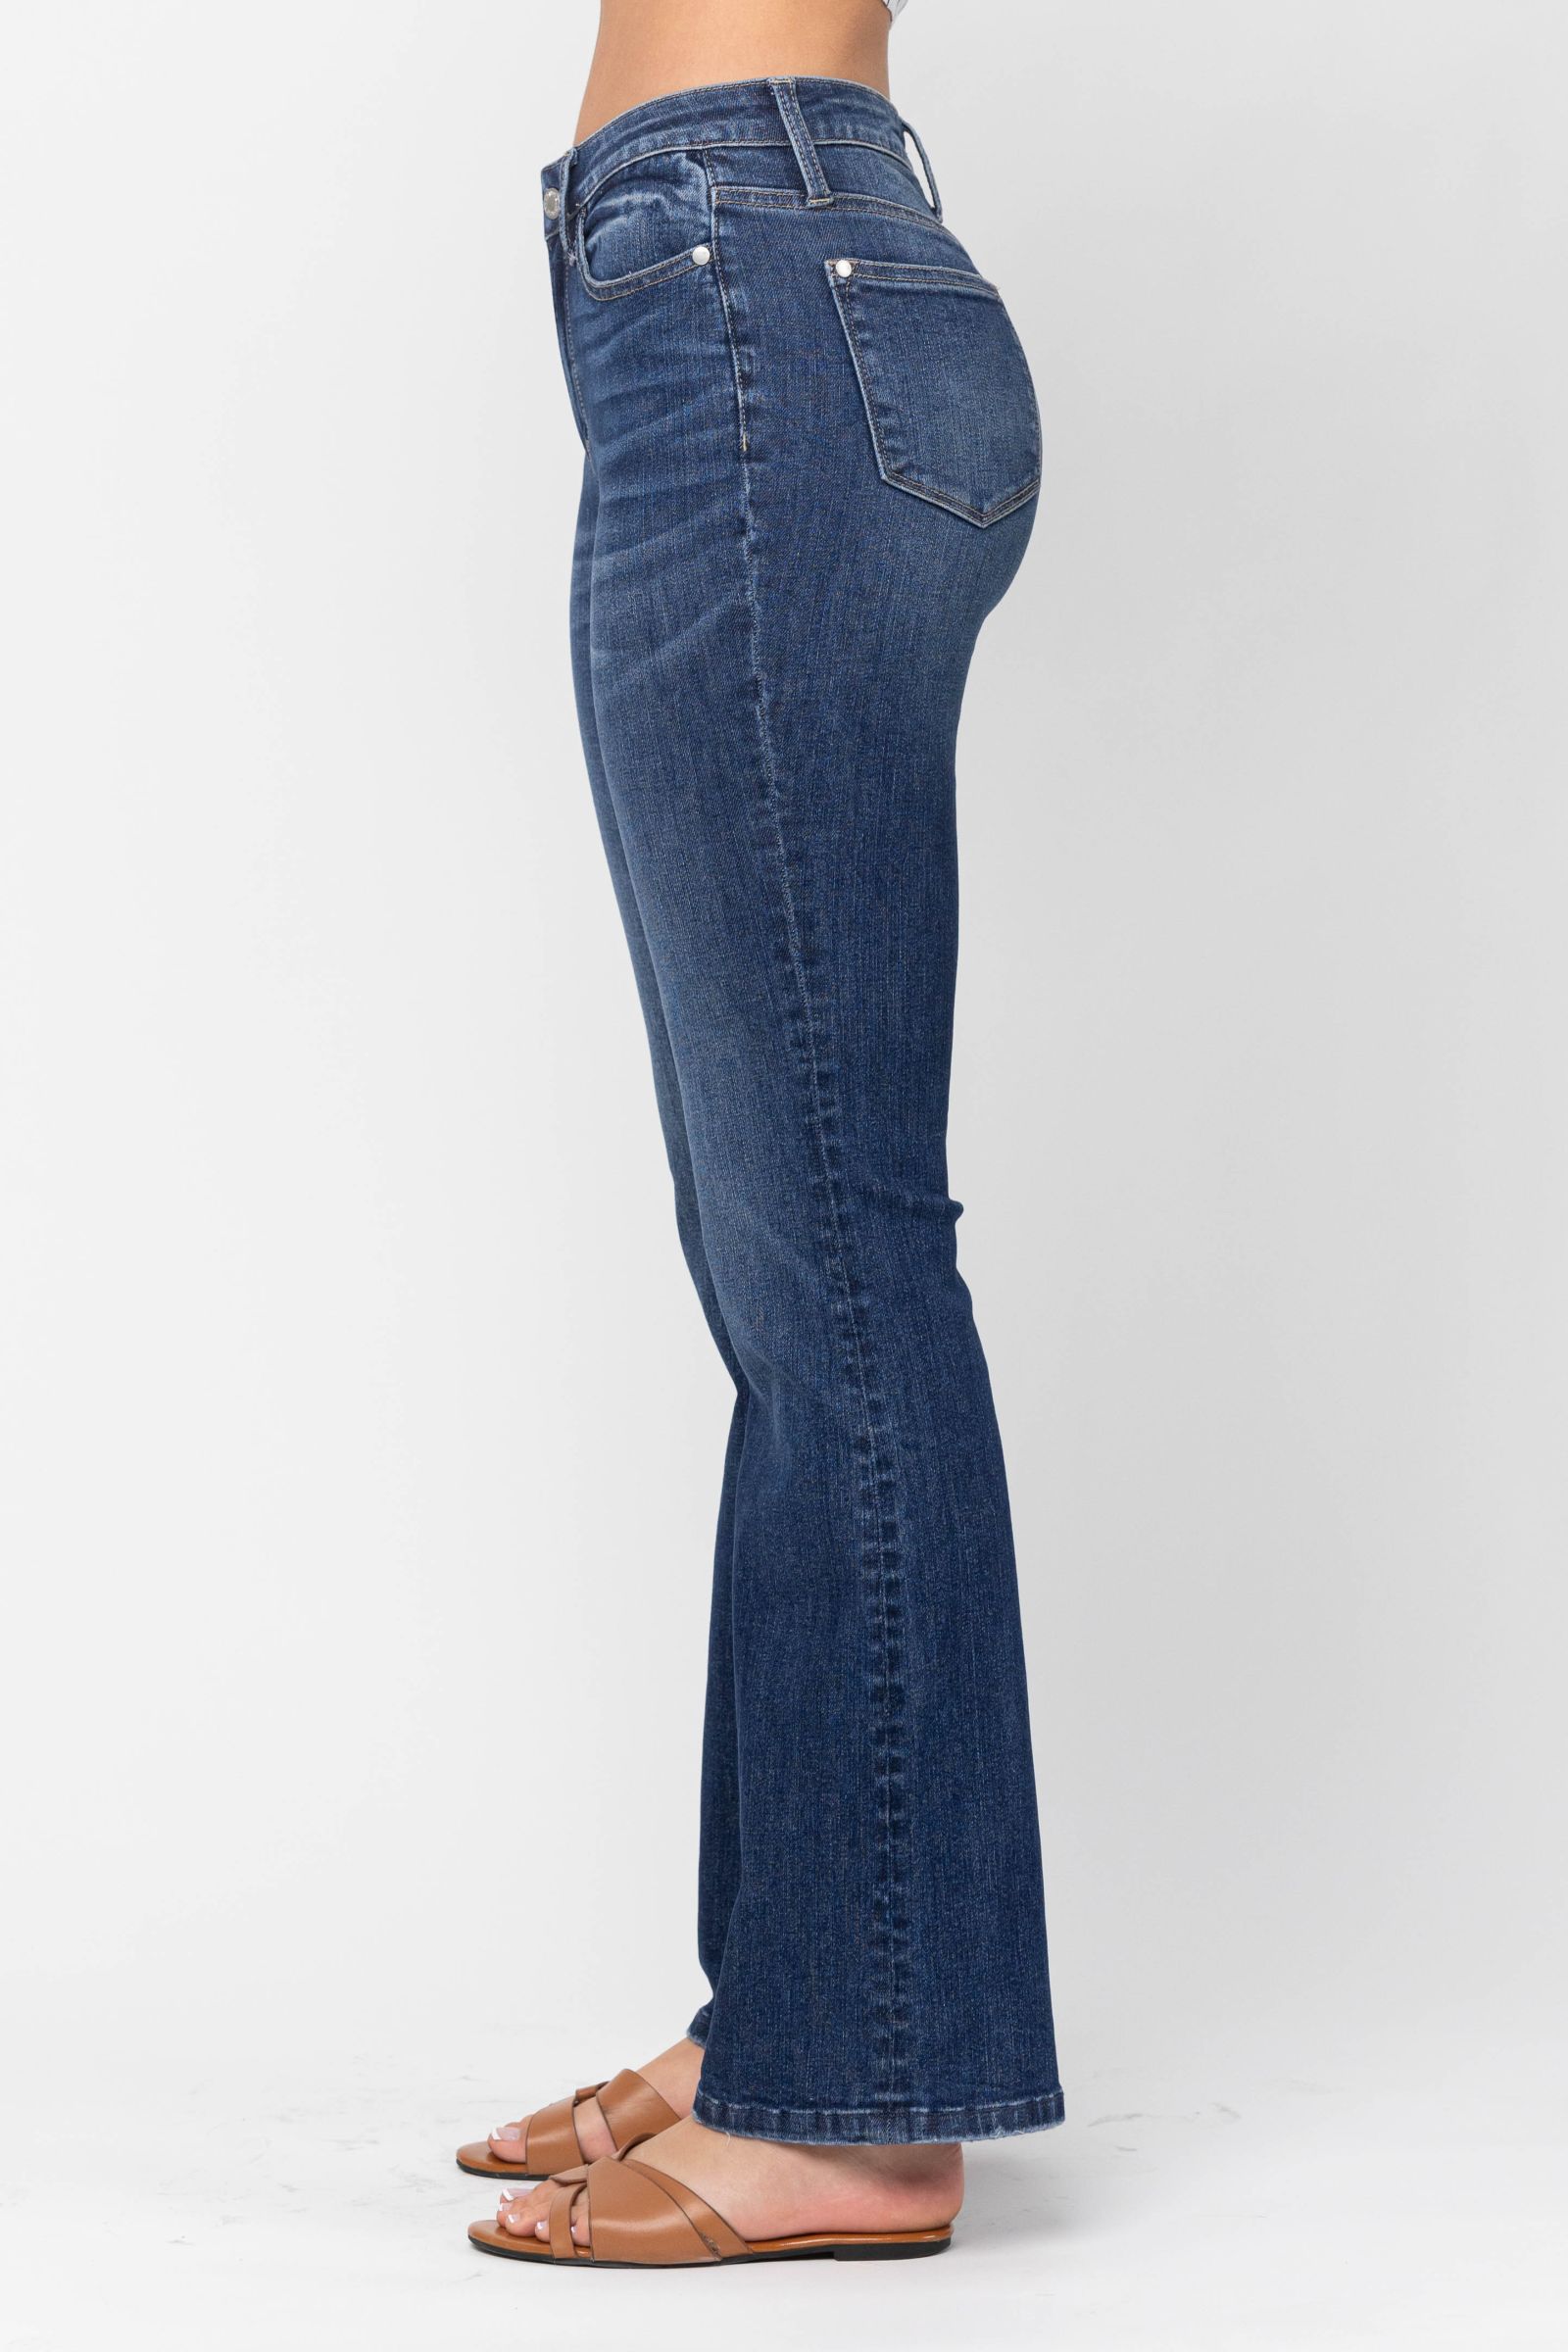 Back Roads - Judy Blue Slim Bootcut Jeans – Resort to Style